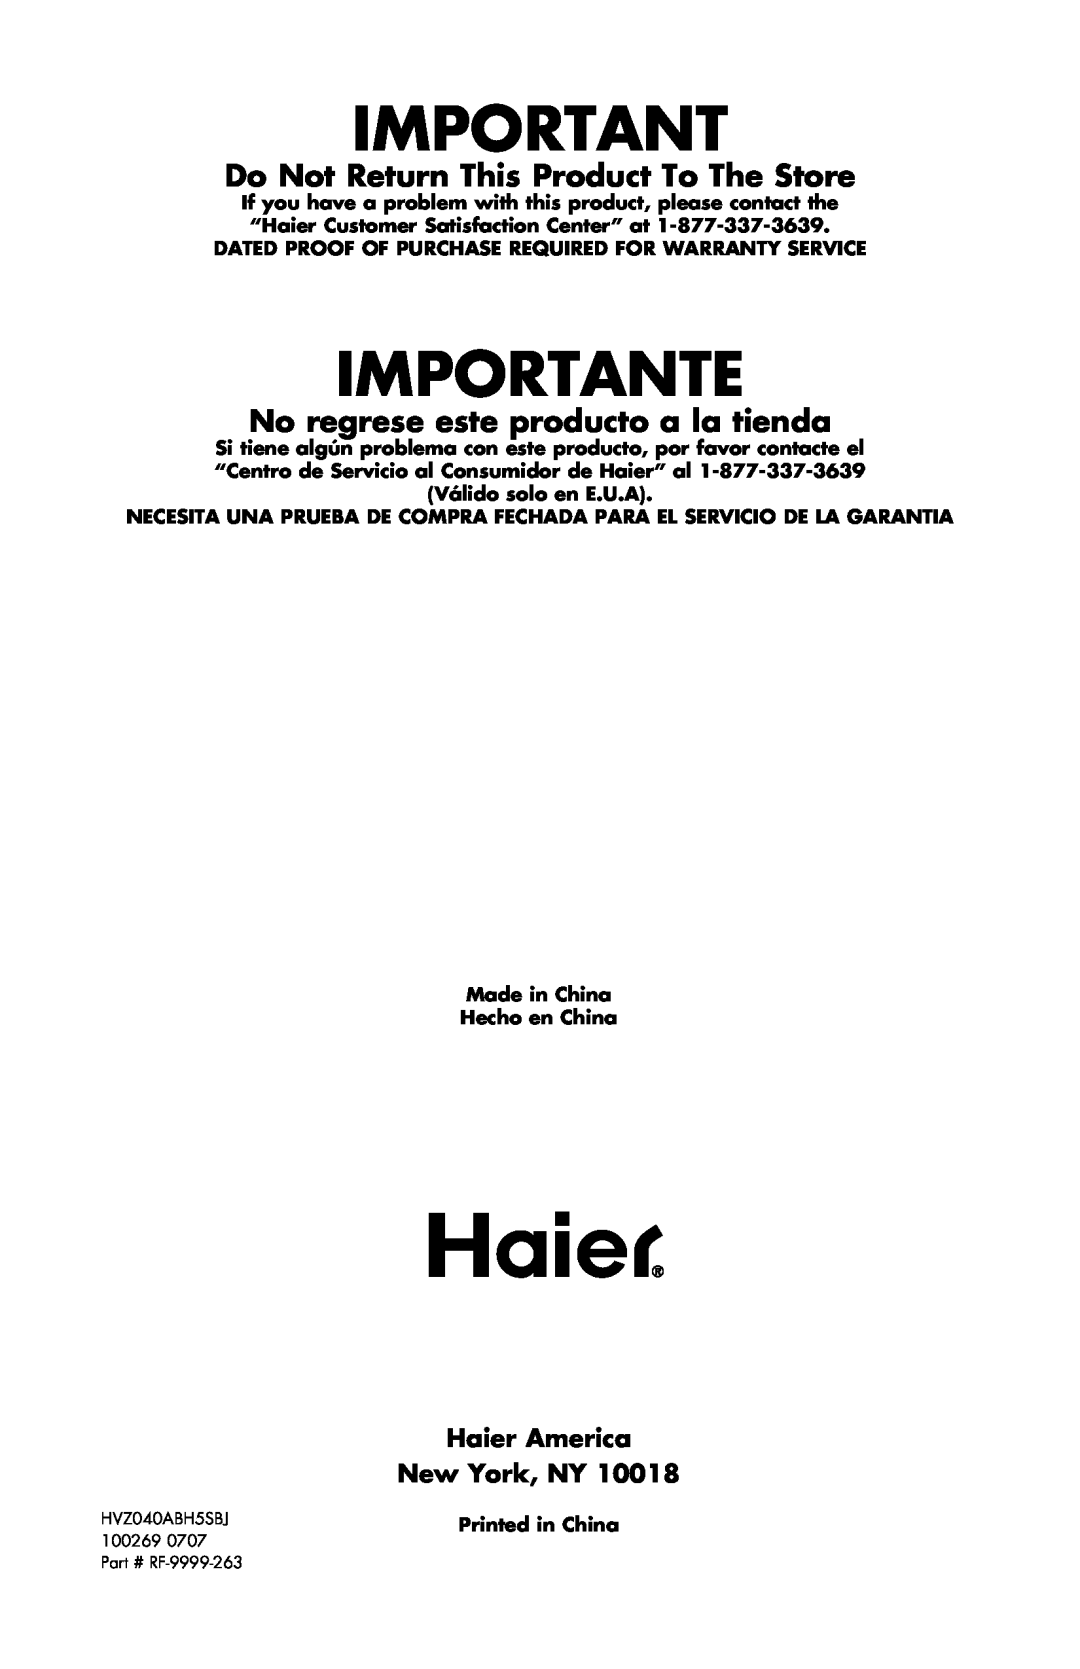 Haier HVZ040ABH5SBJ user manual Importante, Do Not Return This Product To The Store, No regrese este producto a la tienda 